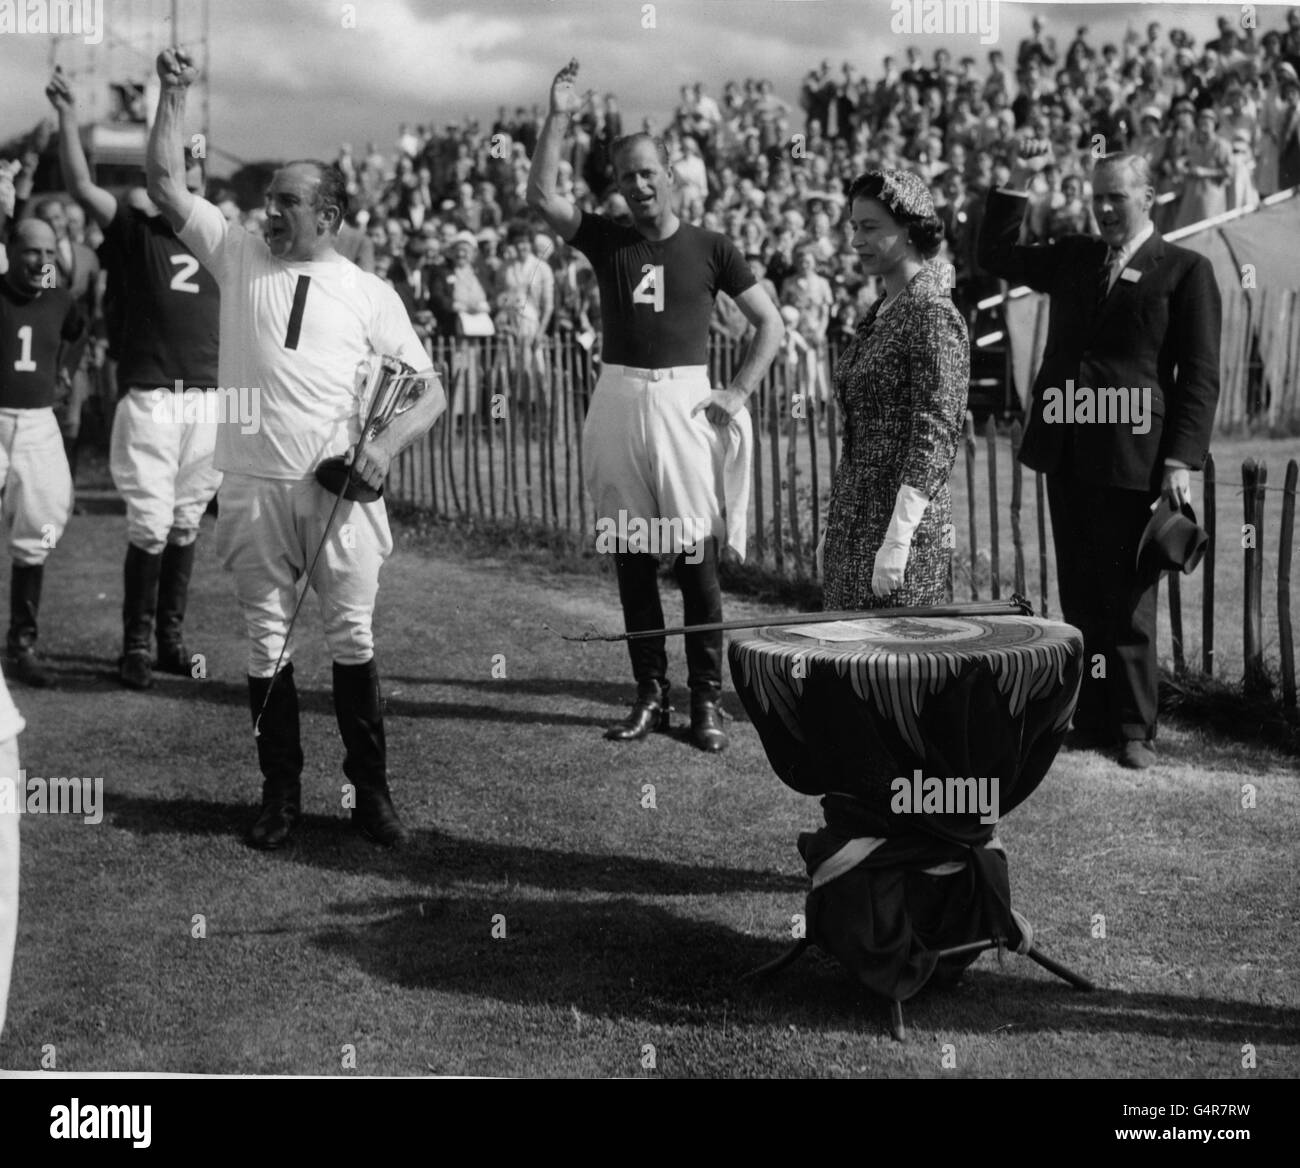 The Duke of Edinburgh (no. 4) joins in three cheers for the Queen, led by A.G Boyd Gibbins (no.1, wearing white) at Smith's Lawn, Windsor Great Park, after the Duke of Edinburgh captained the Windsor Park team to a draw against Silver Leys. Stock Photo